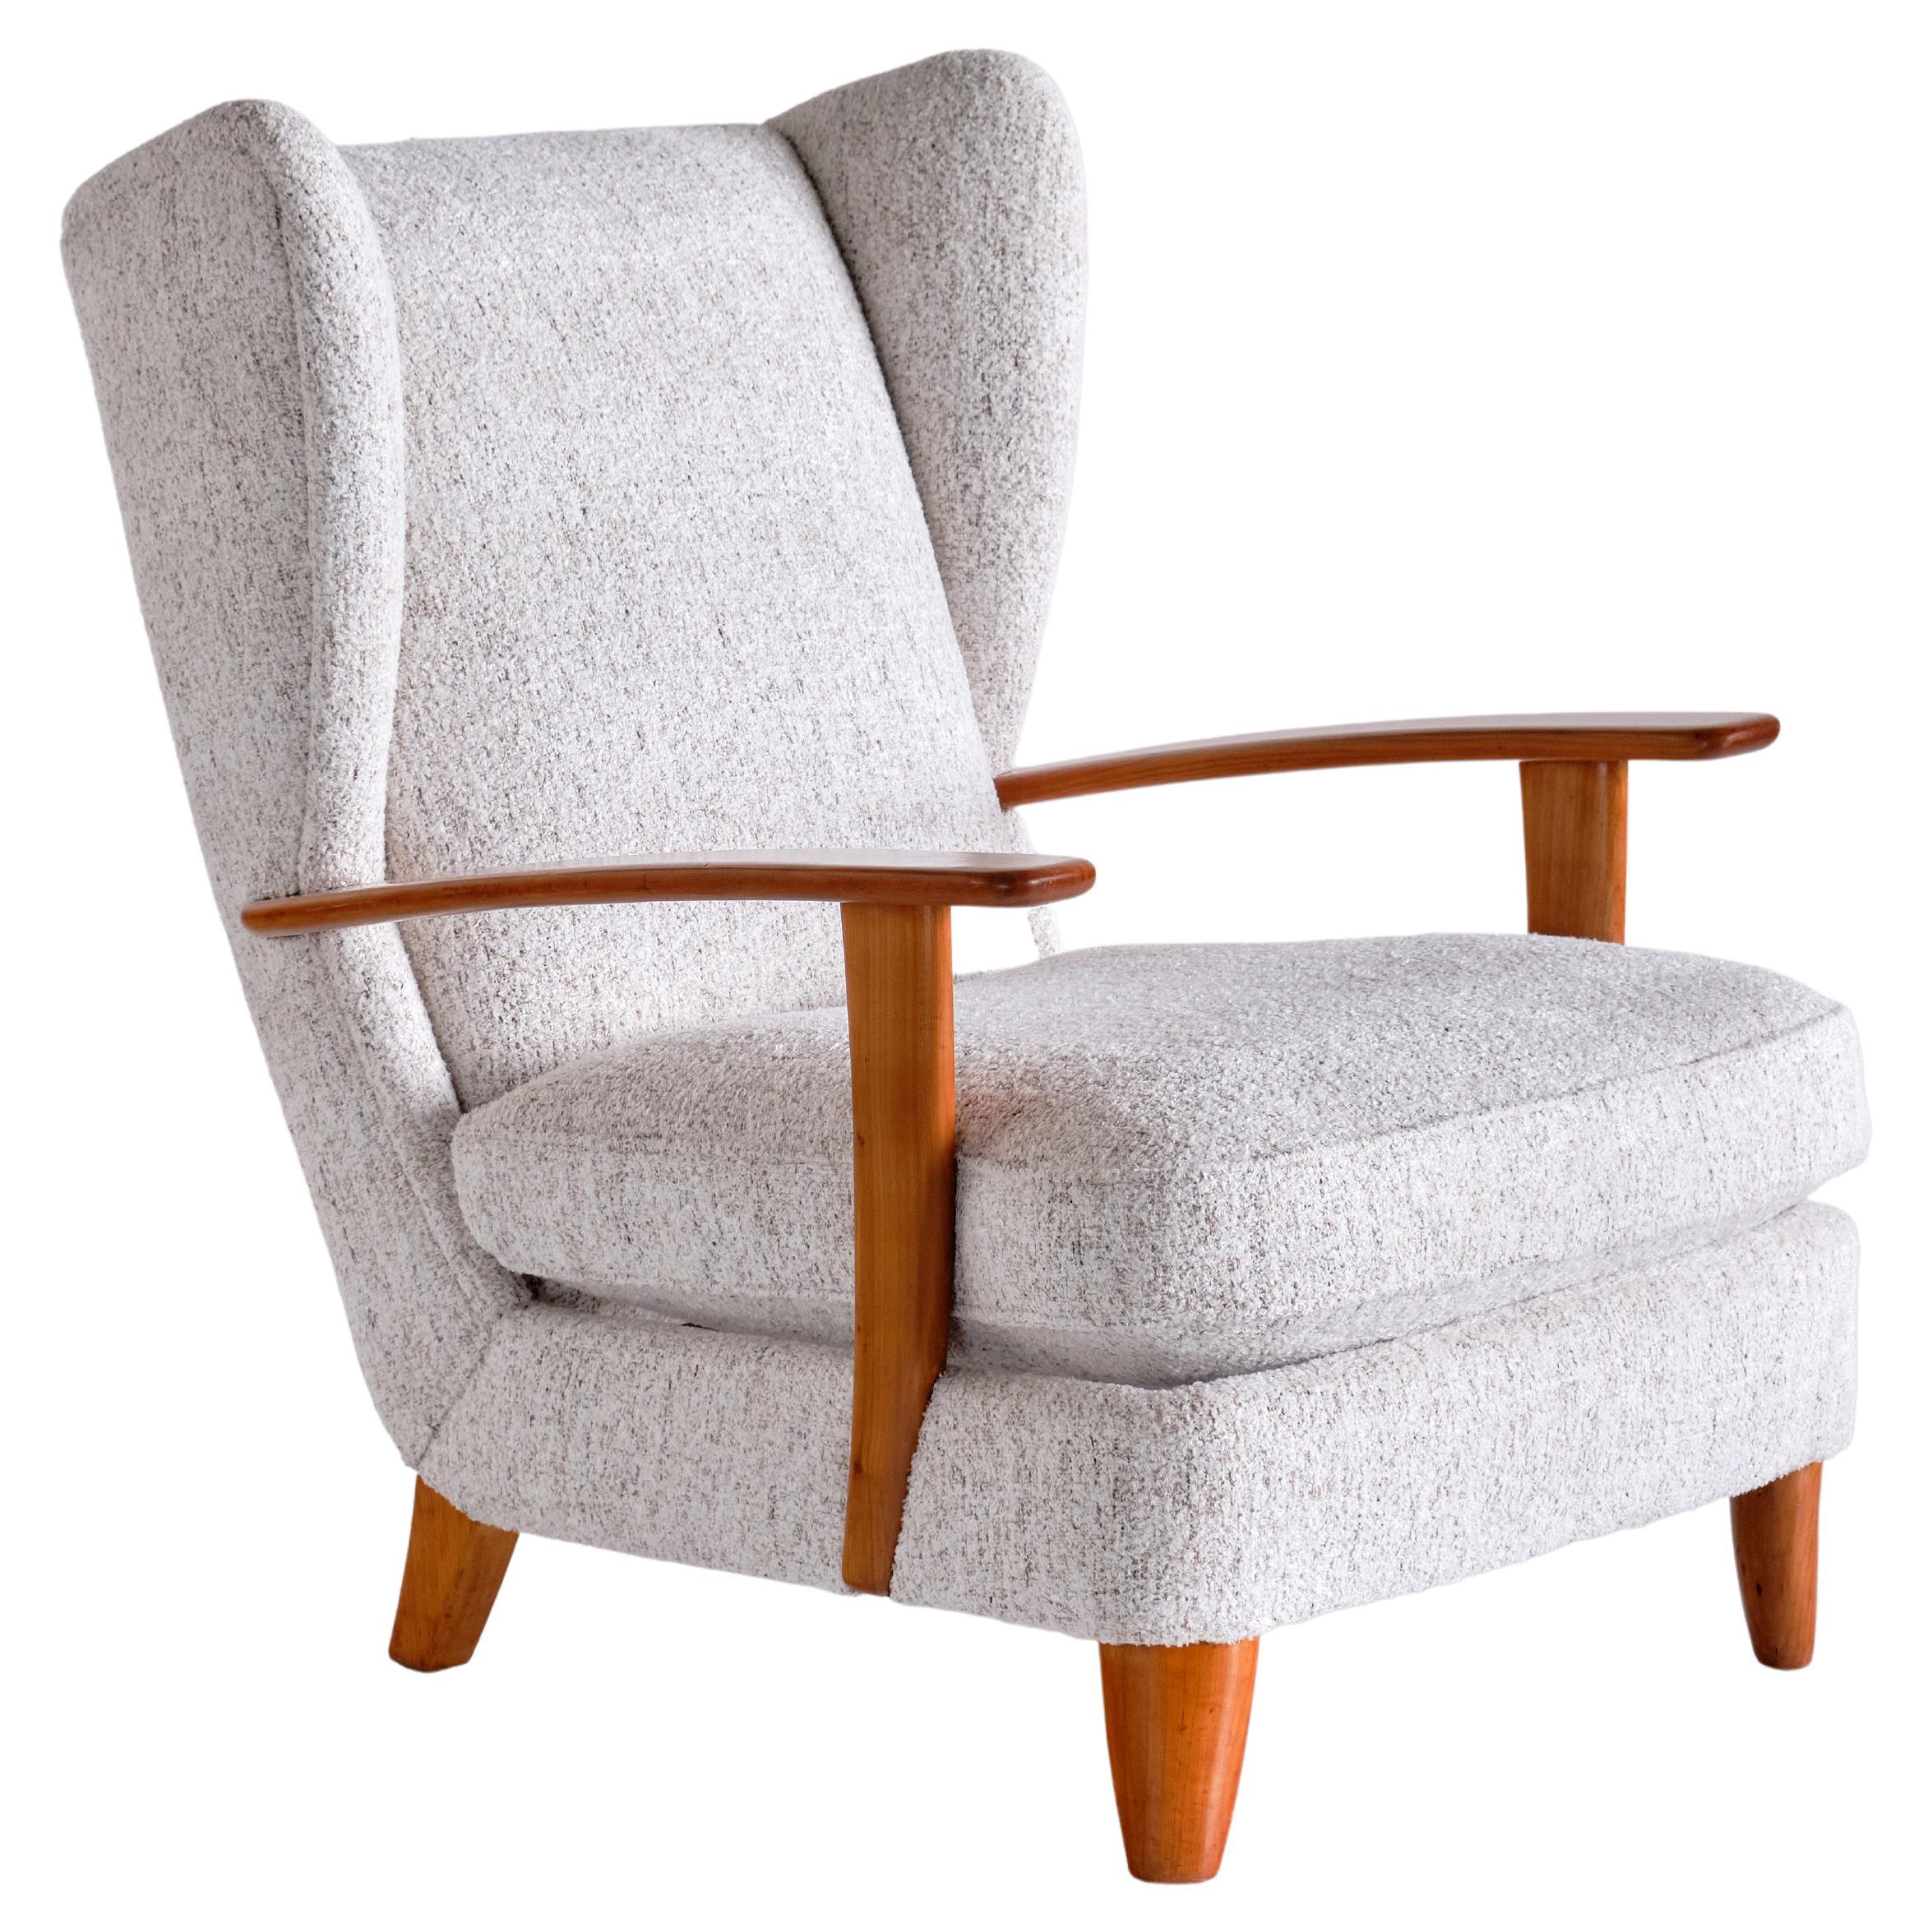 Gio Ponti Wingback Chair in Cherry Wood and Mélange Nobilis Fabric, Italy, 1929 For Sale